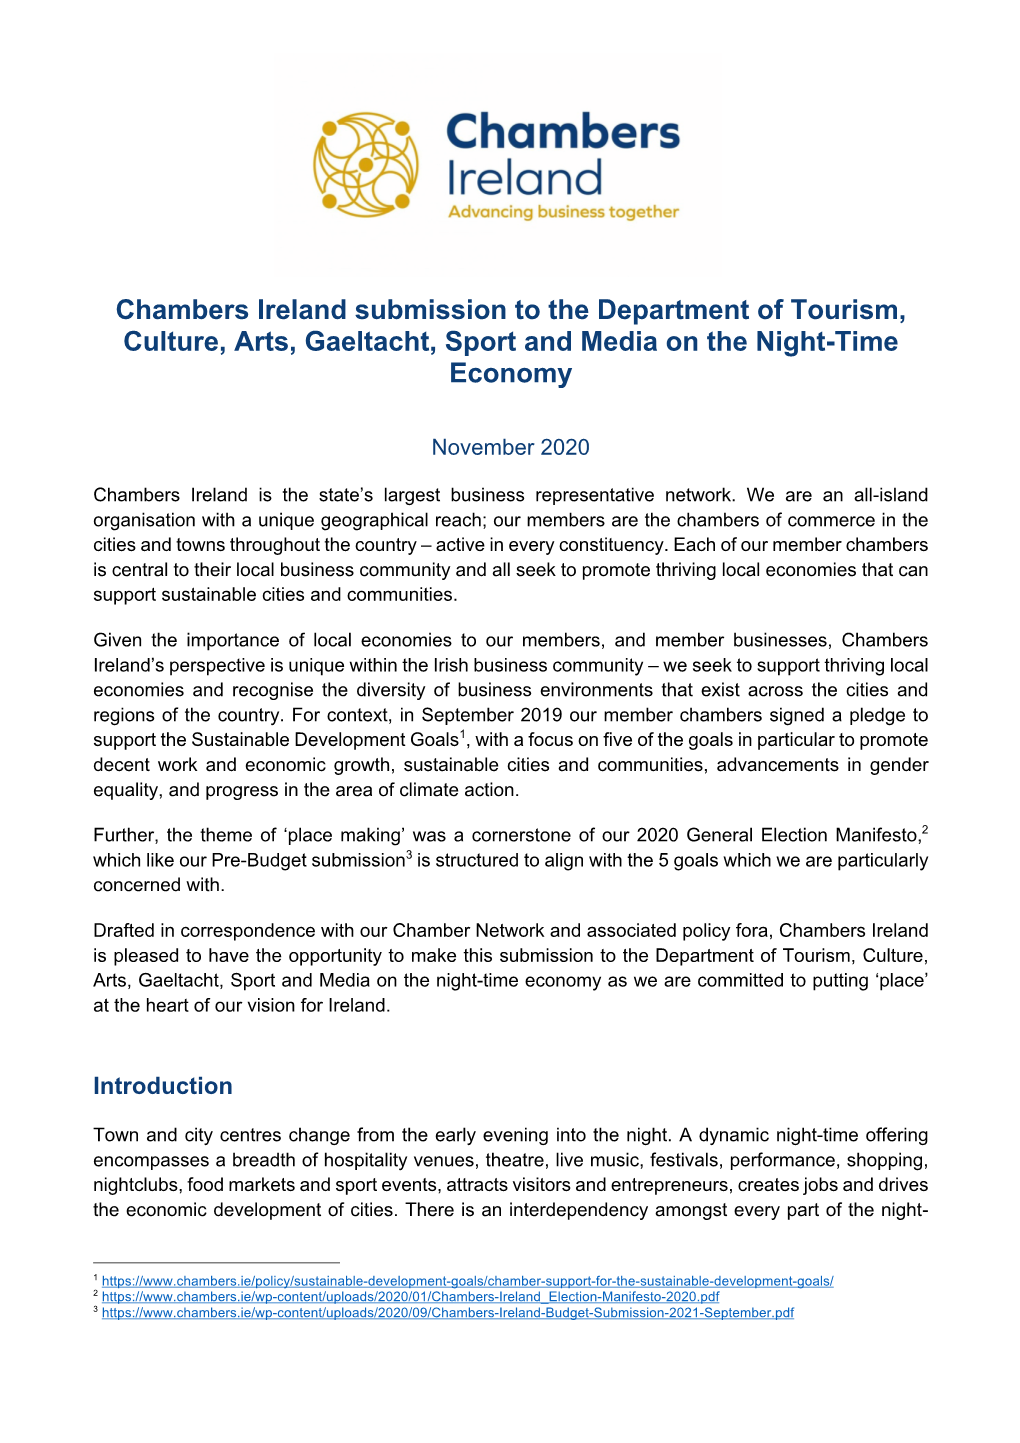 Chambers Ireland Submission to the Department of Tourism, Culture, Arts, Gaeltacht, Sport and Media on the Night-Time Economy